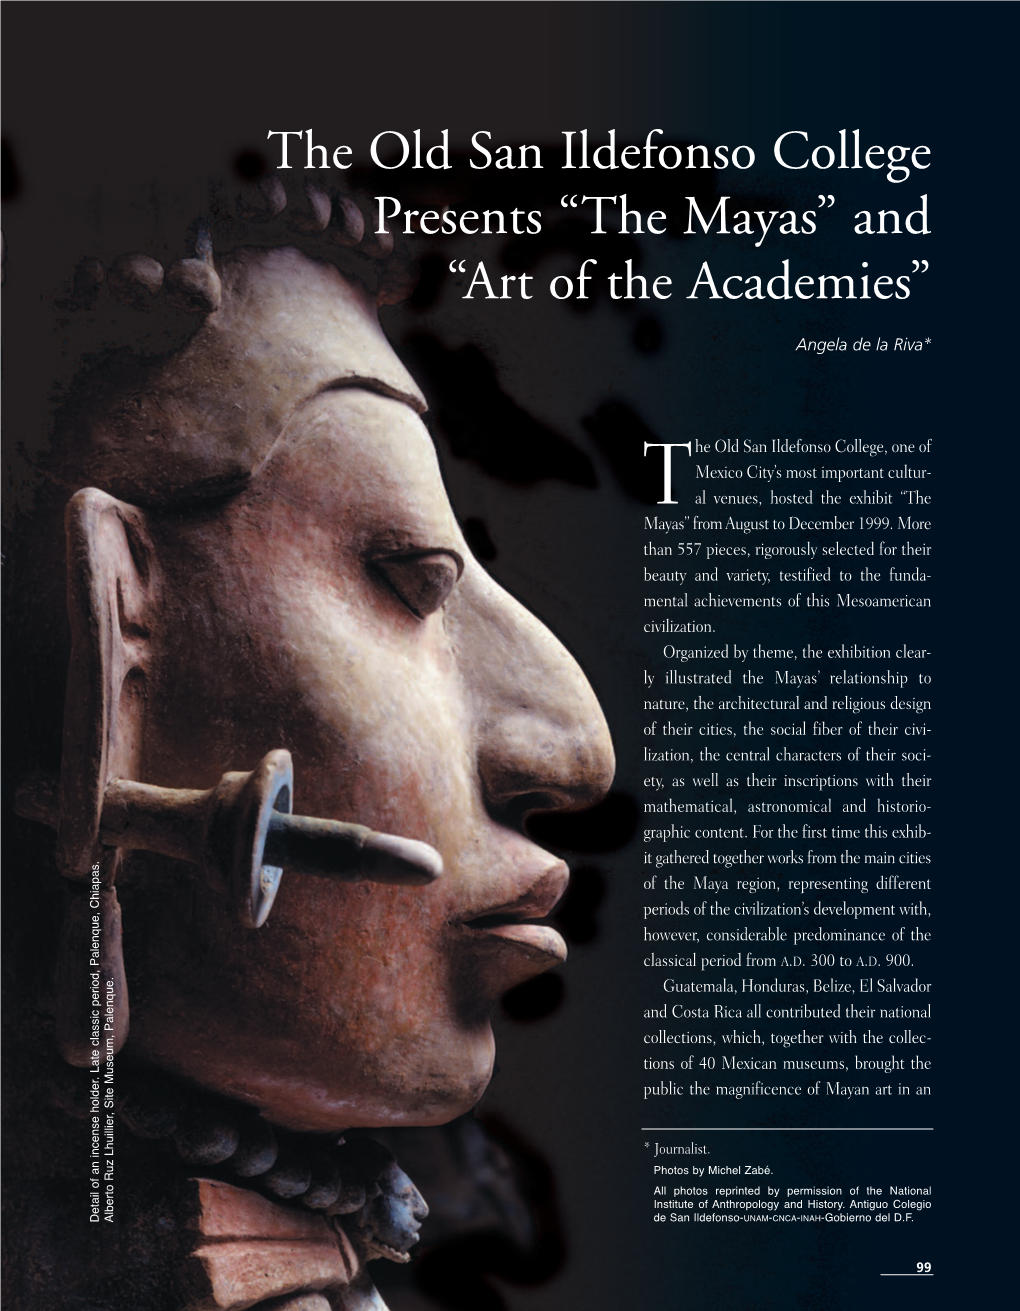 The Old San Ildefonso College Presents “The Mayas” and “Art of the Academies”